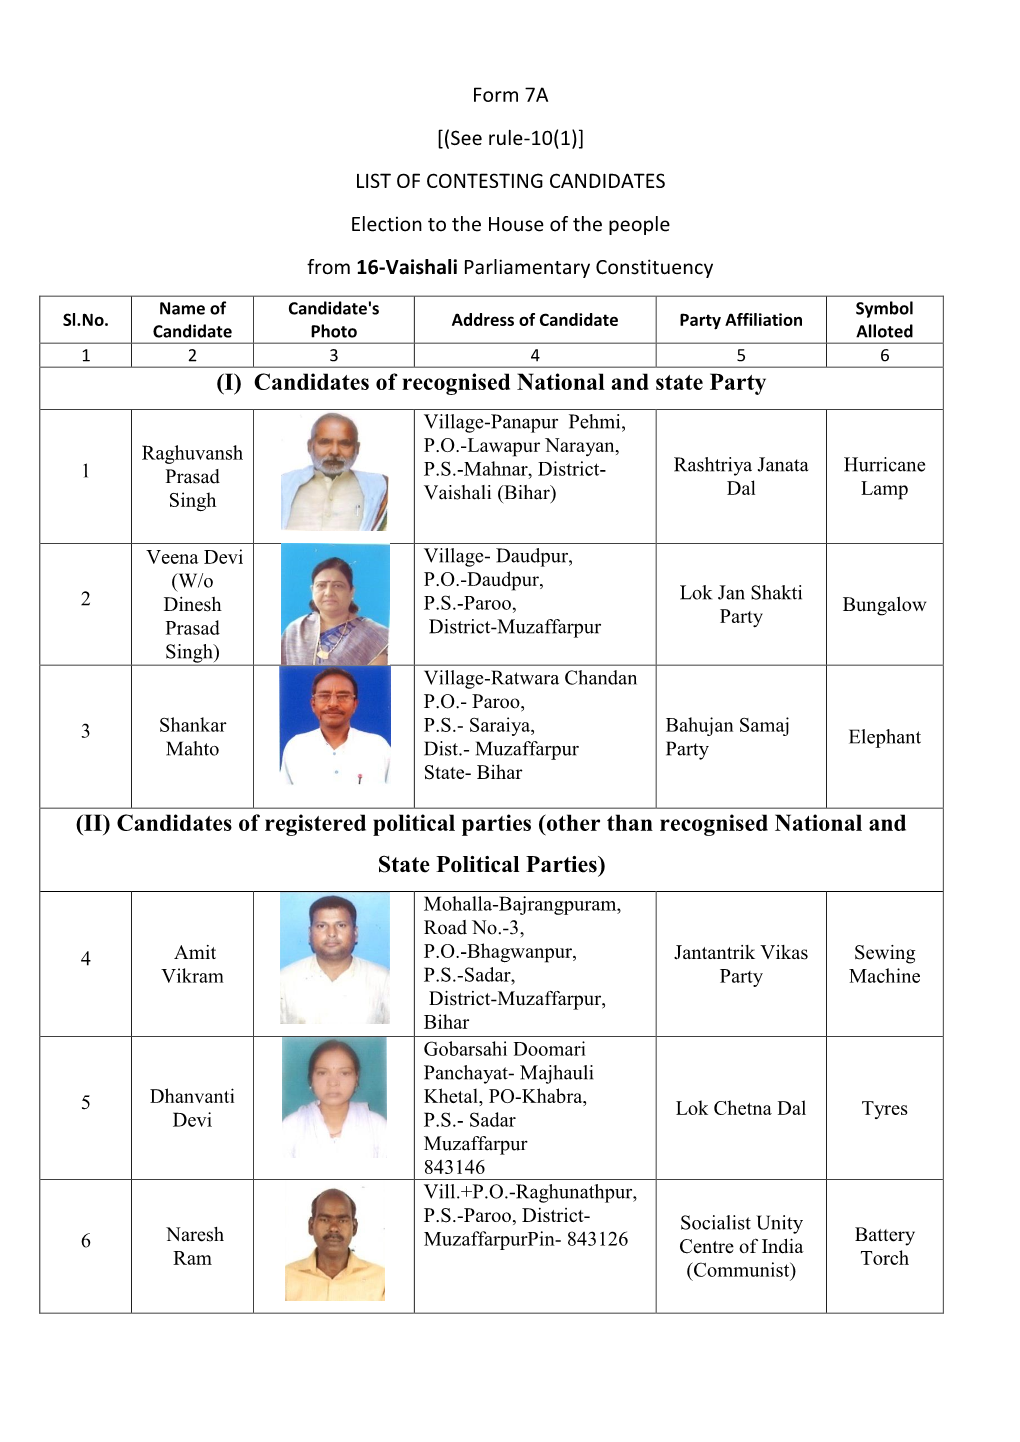 Candidates of Registered Political Parties